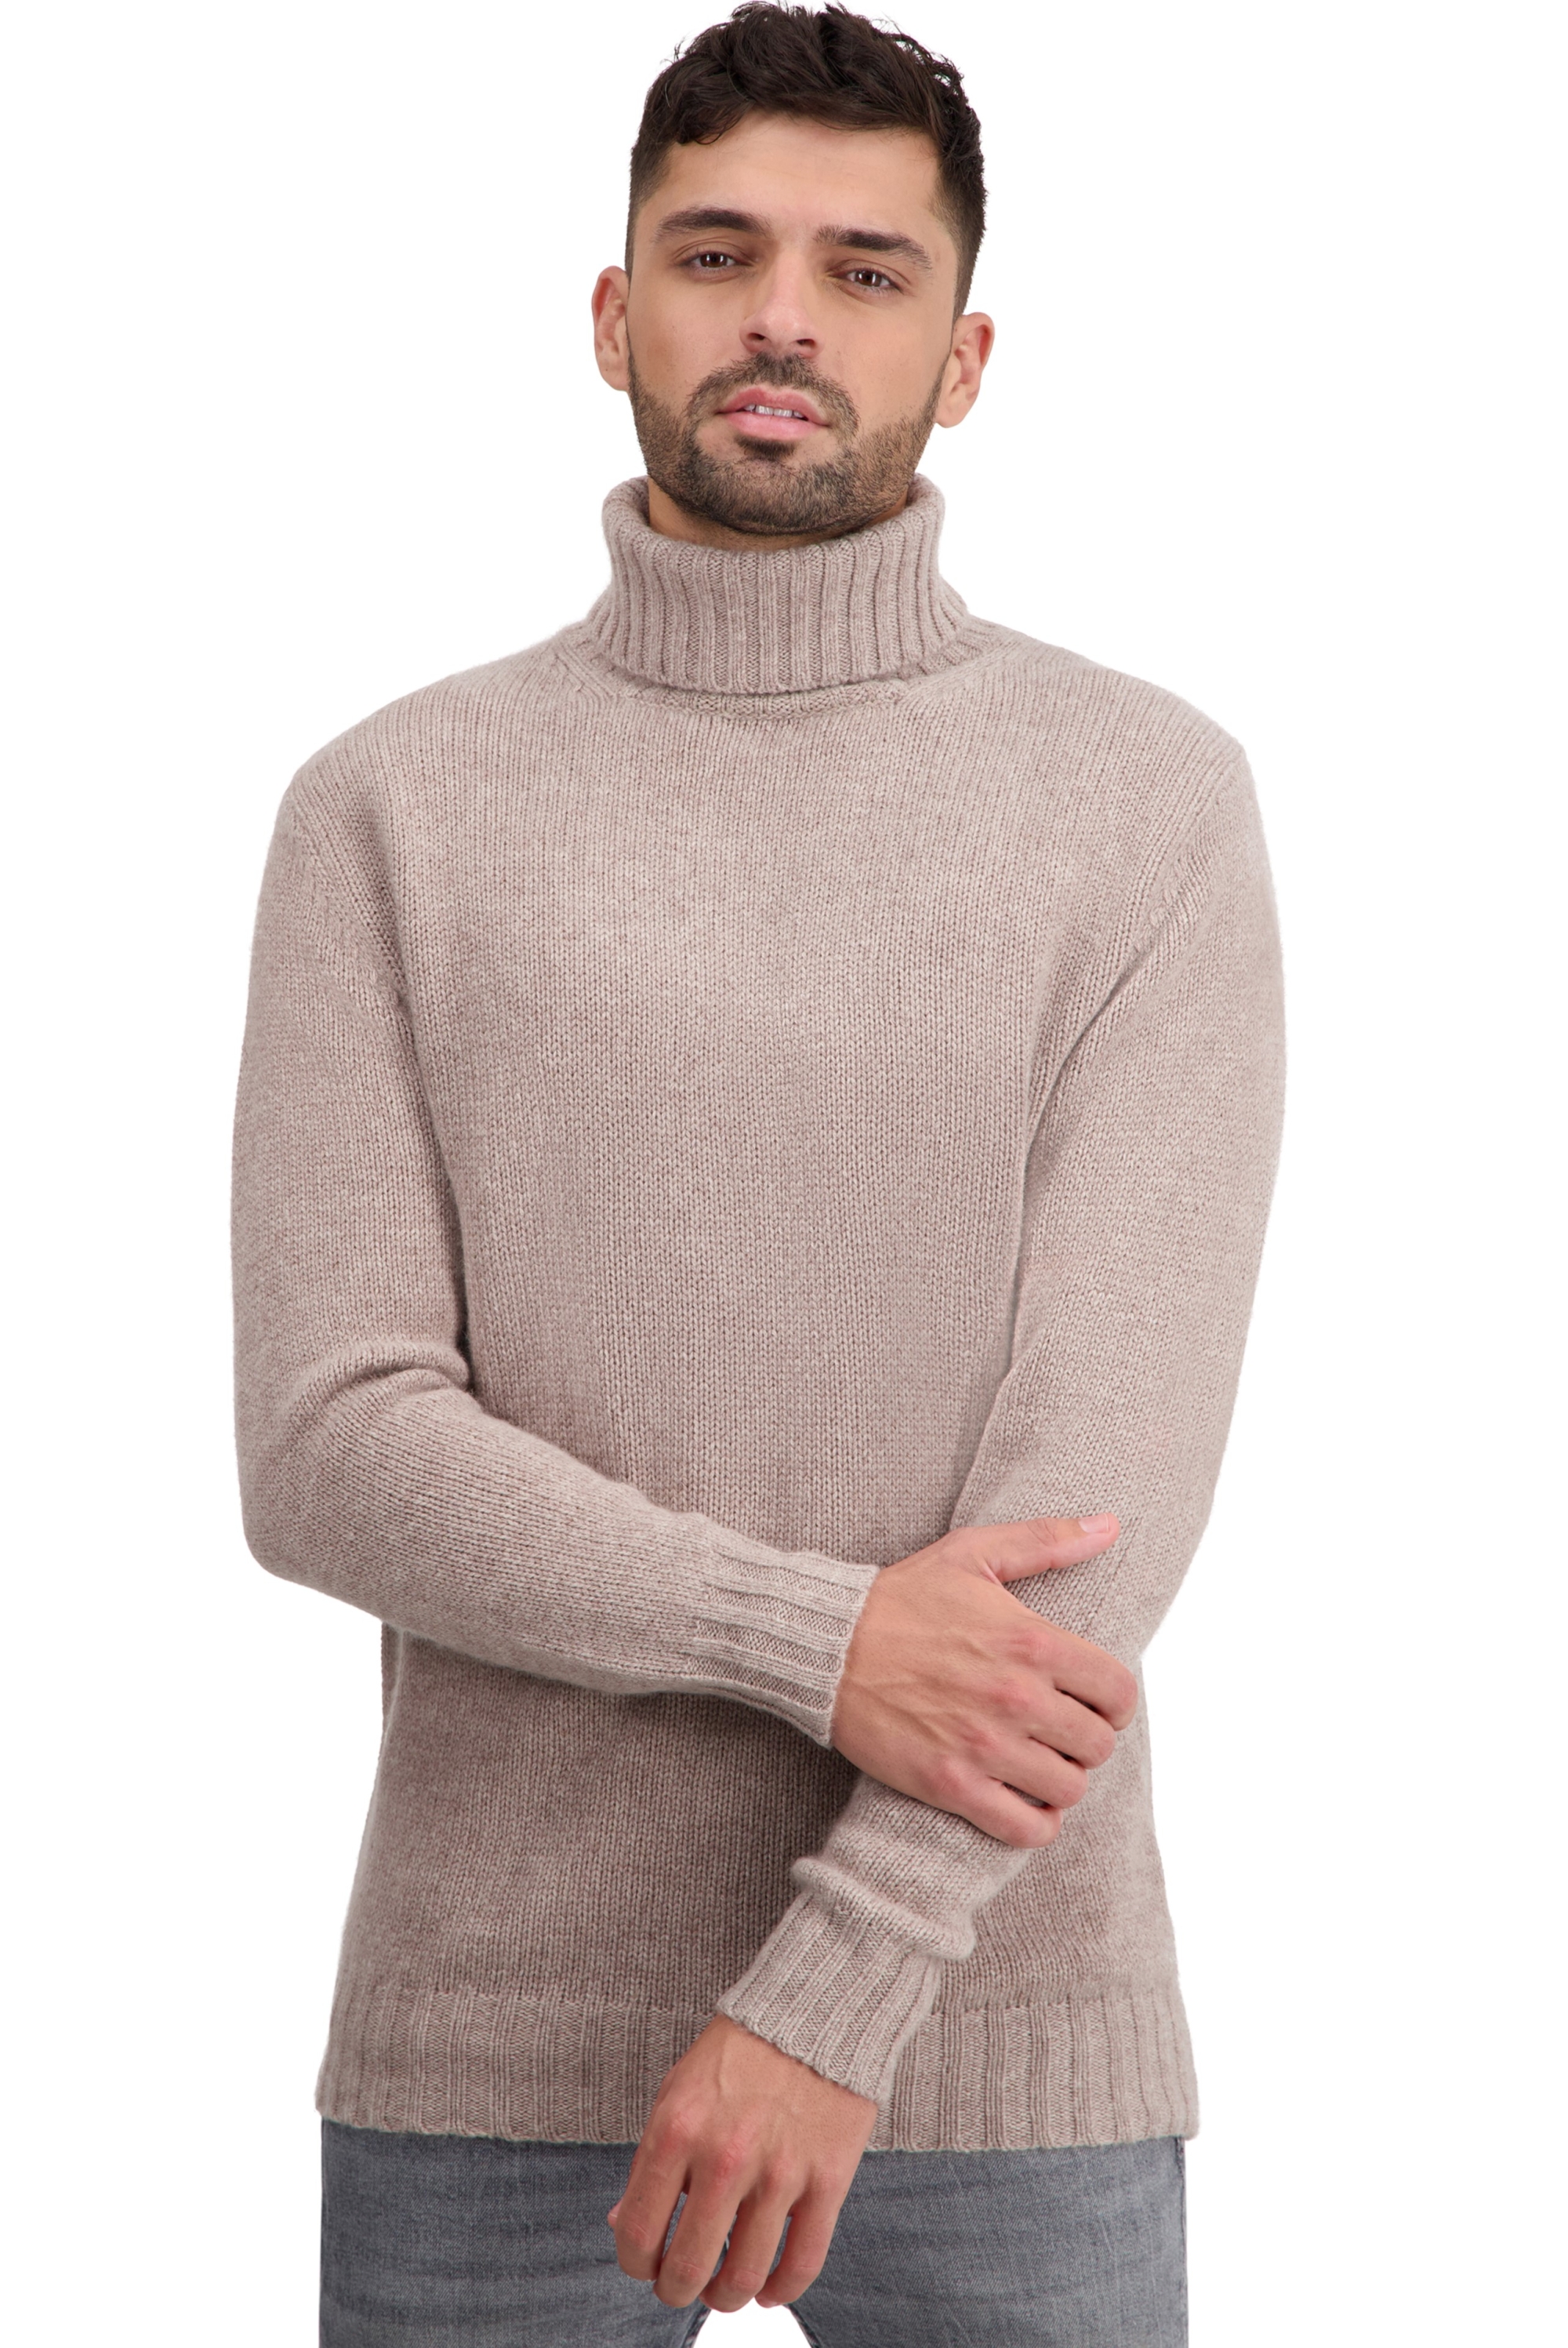 Cashmere men basic sweaters at low prices tobago first toast l